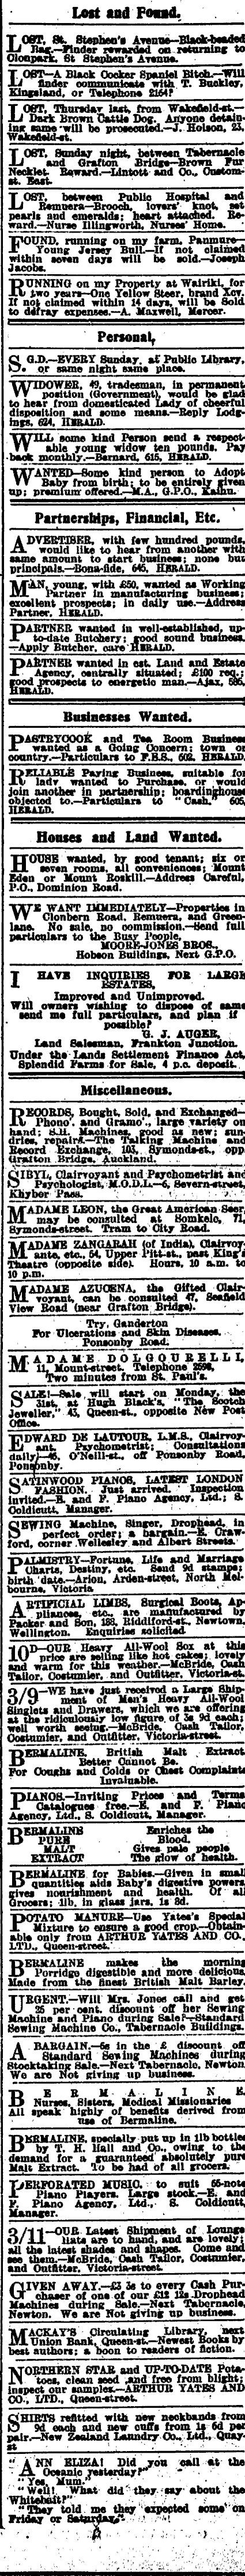 Papers Past | Newspapers | New Zealand Herald | 1 August 1911 | Page 1  Advertisements Column 5